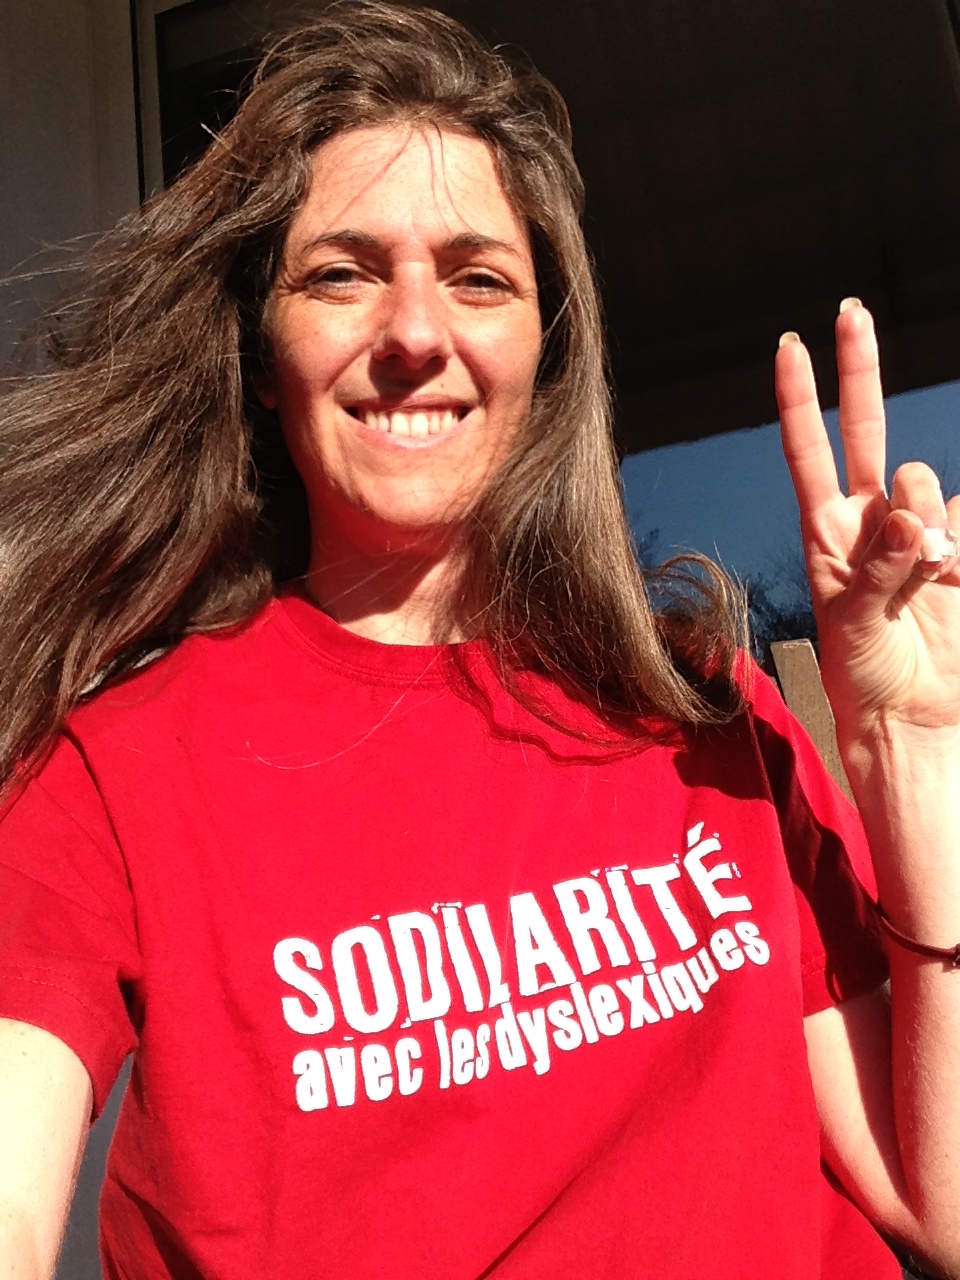 Selfie as I wore my dyslexia t-shirt which reads (in French):sodilarity with the dyslexic